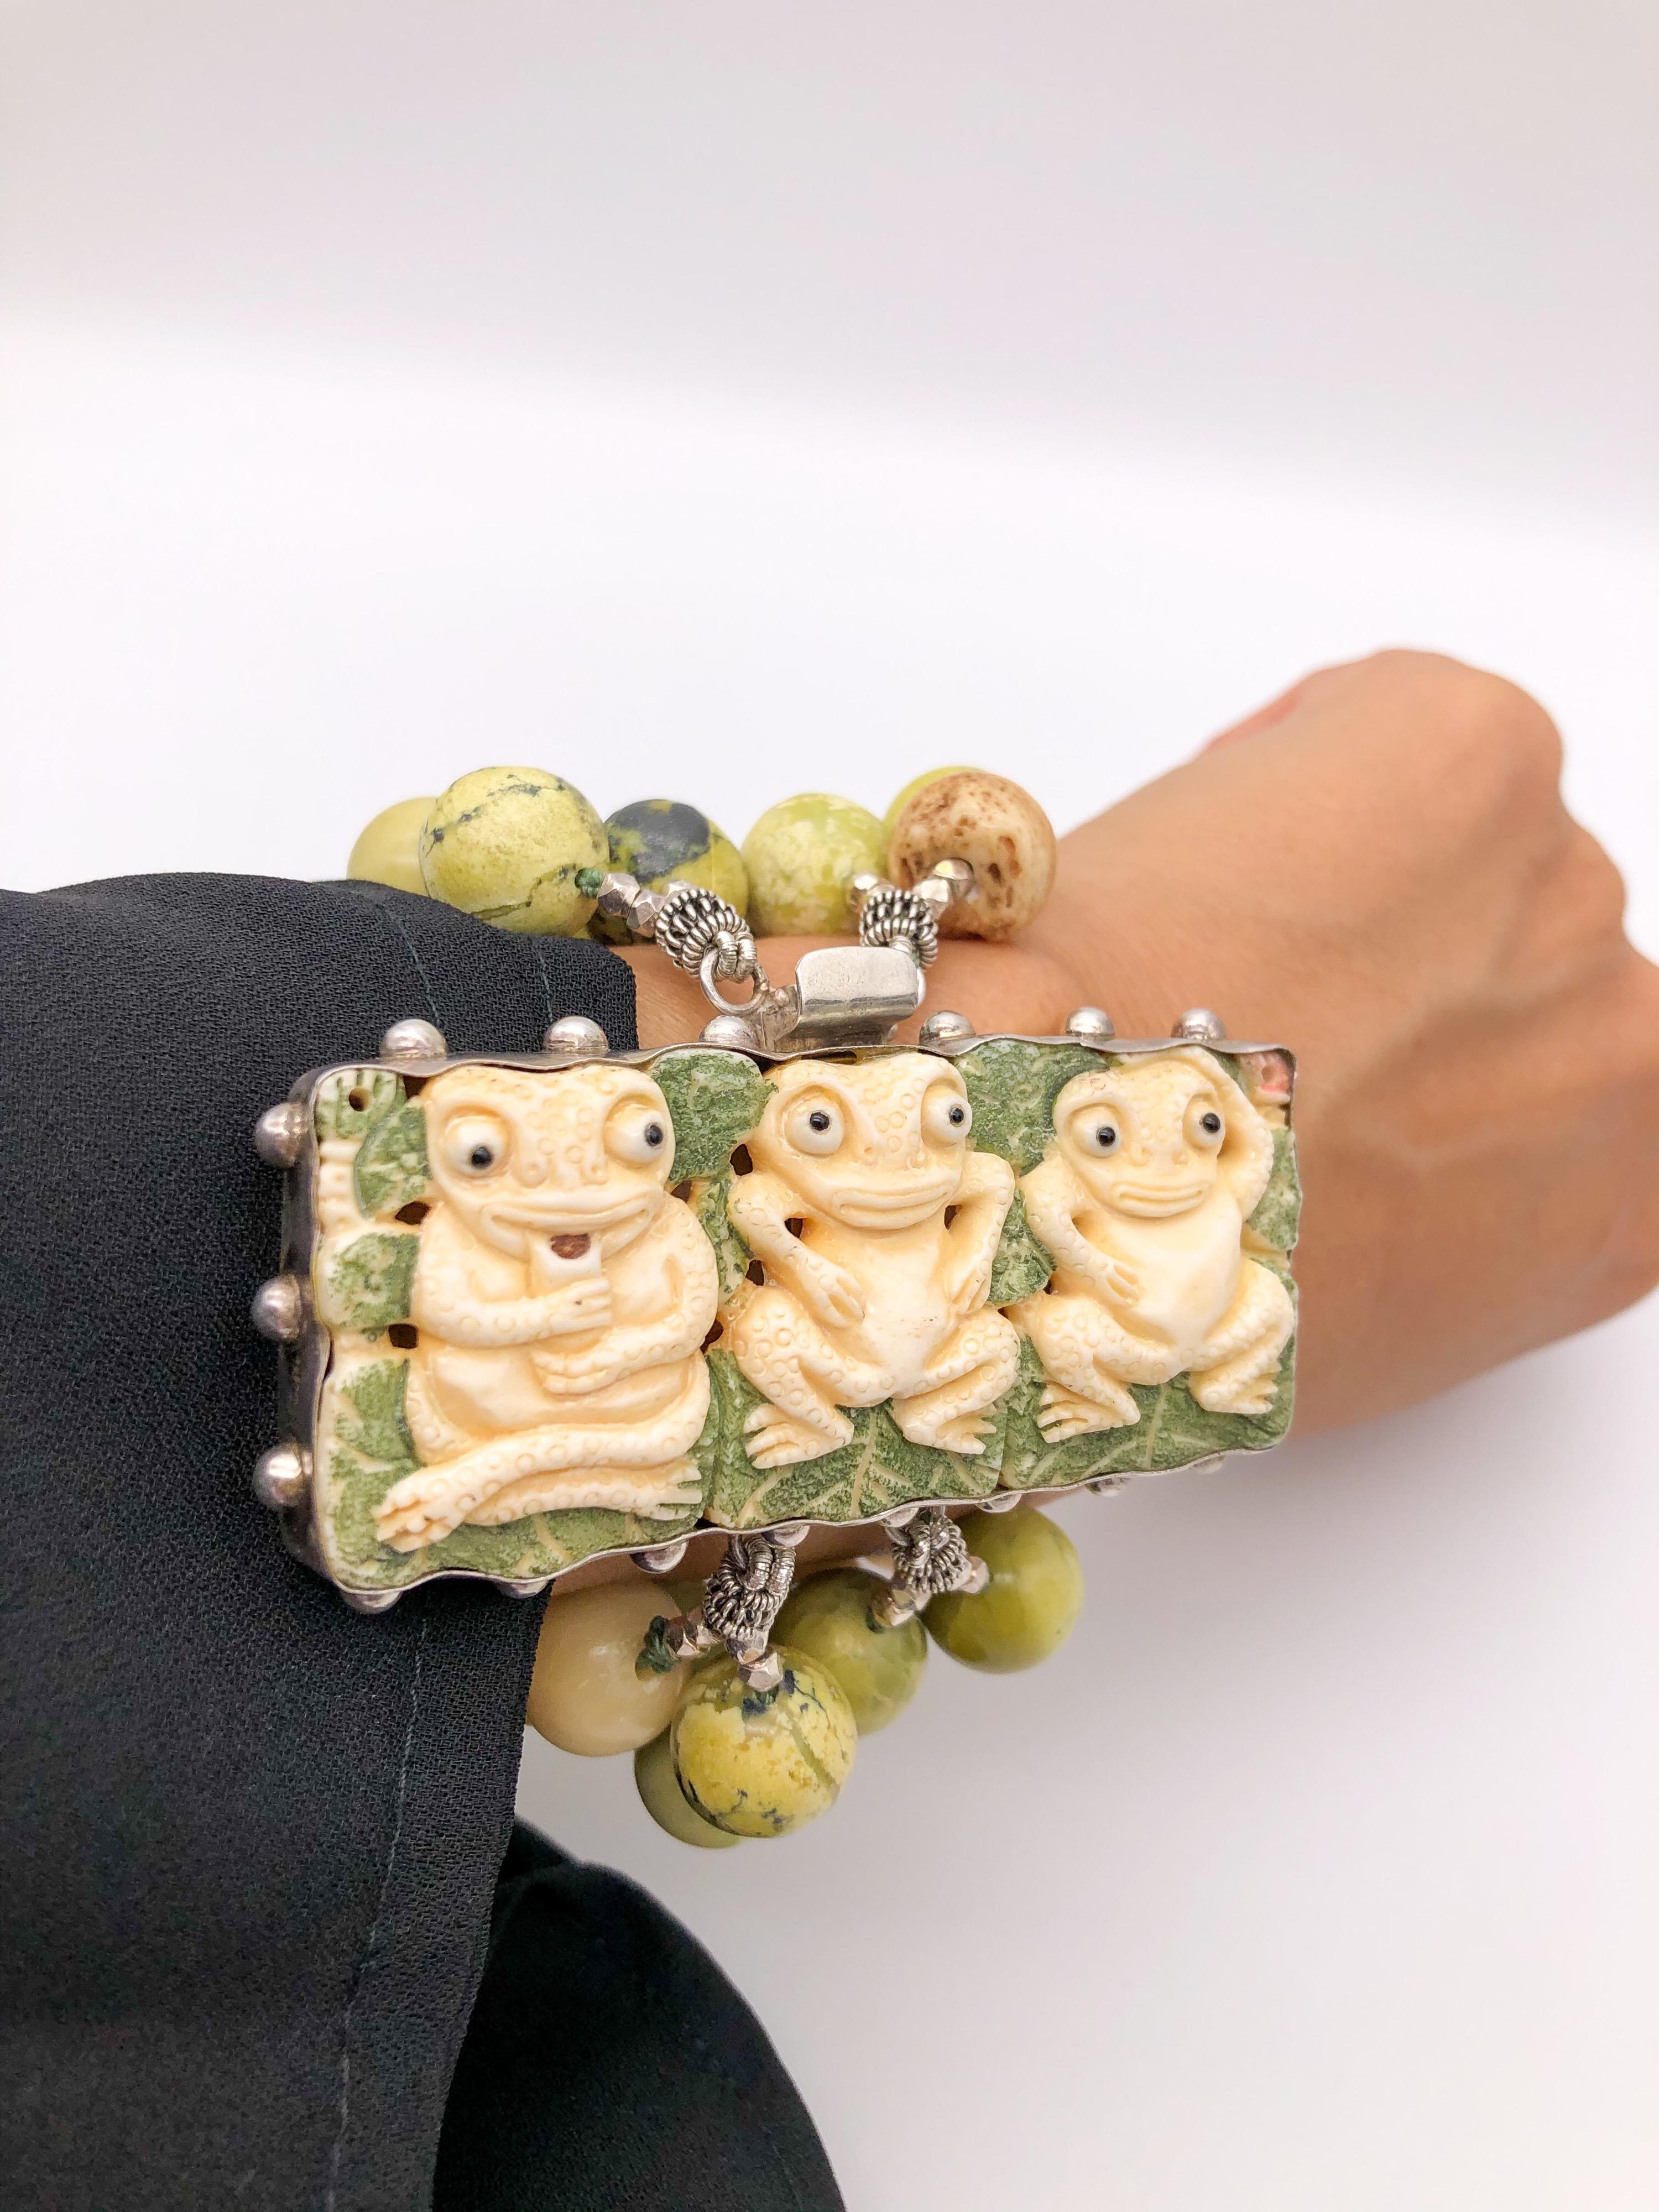 One-of-a-Kind
Statement bold bracelet, 4 strand Olive Jade gemstone is sure to delight with colors varying from a deep olive green to a light avocado. Fabulous carved 3 little frogs set on Sterling Silver clasp.
March birthstone.
Silk